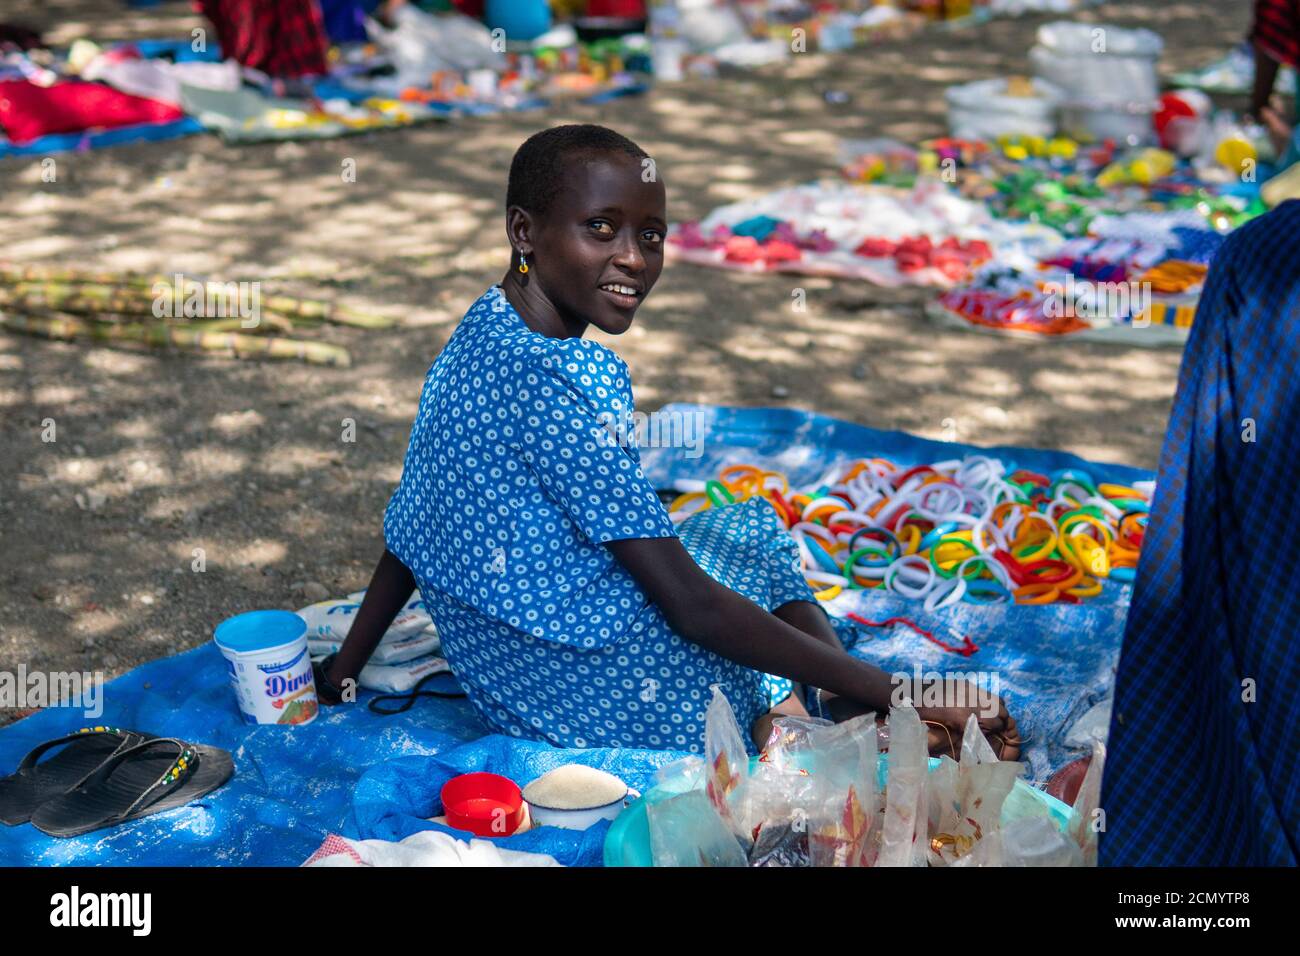 ENGARE SERO. TANZANIA - JANUARY 2020: Market Day in Indigenous Maasai in Traditional Village. Maasailand is the area in Rift Valley Between Kenya and Stock Photo